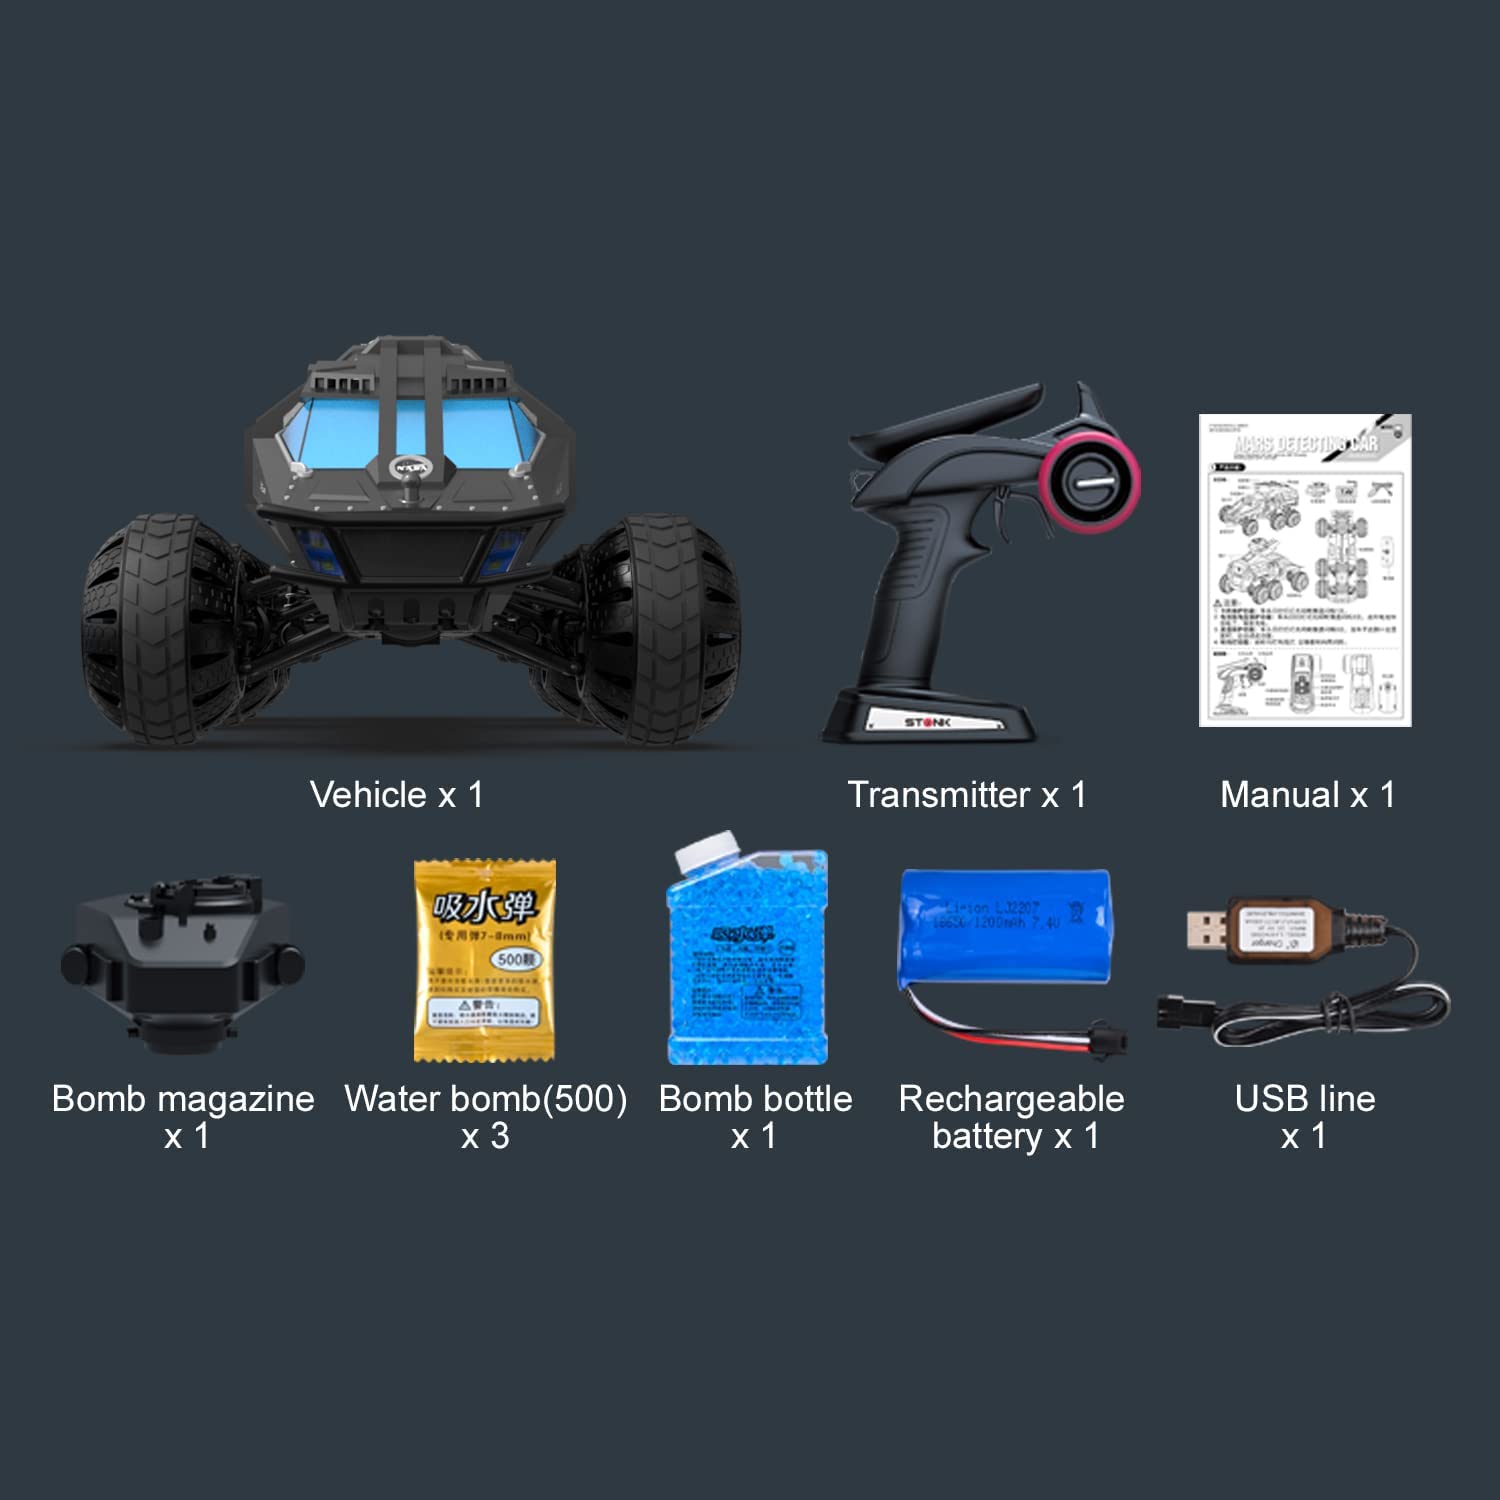 VOLANTEXRC 1/12 Scale High Speed Remote Control Crawler RC Tank All Terrain RC Truck for Kids & Adult